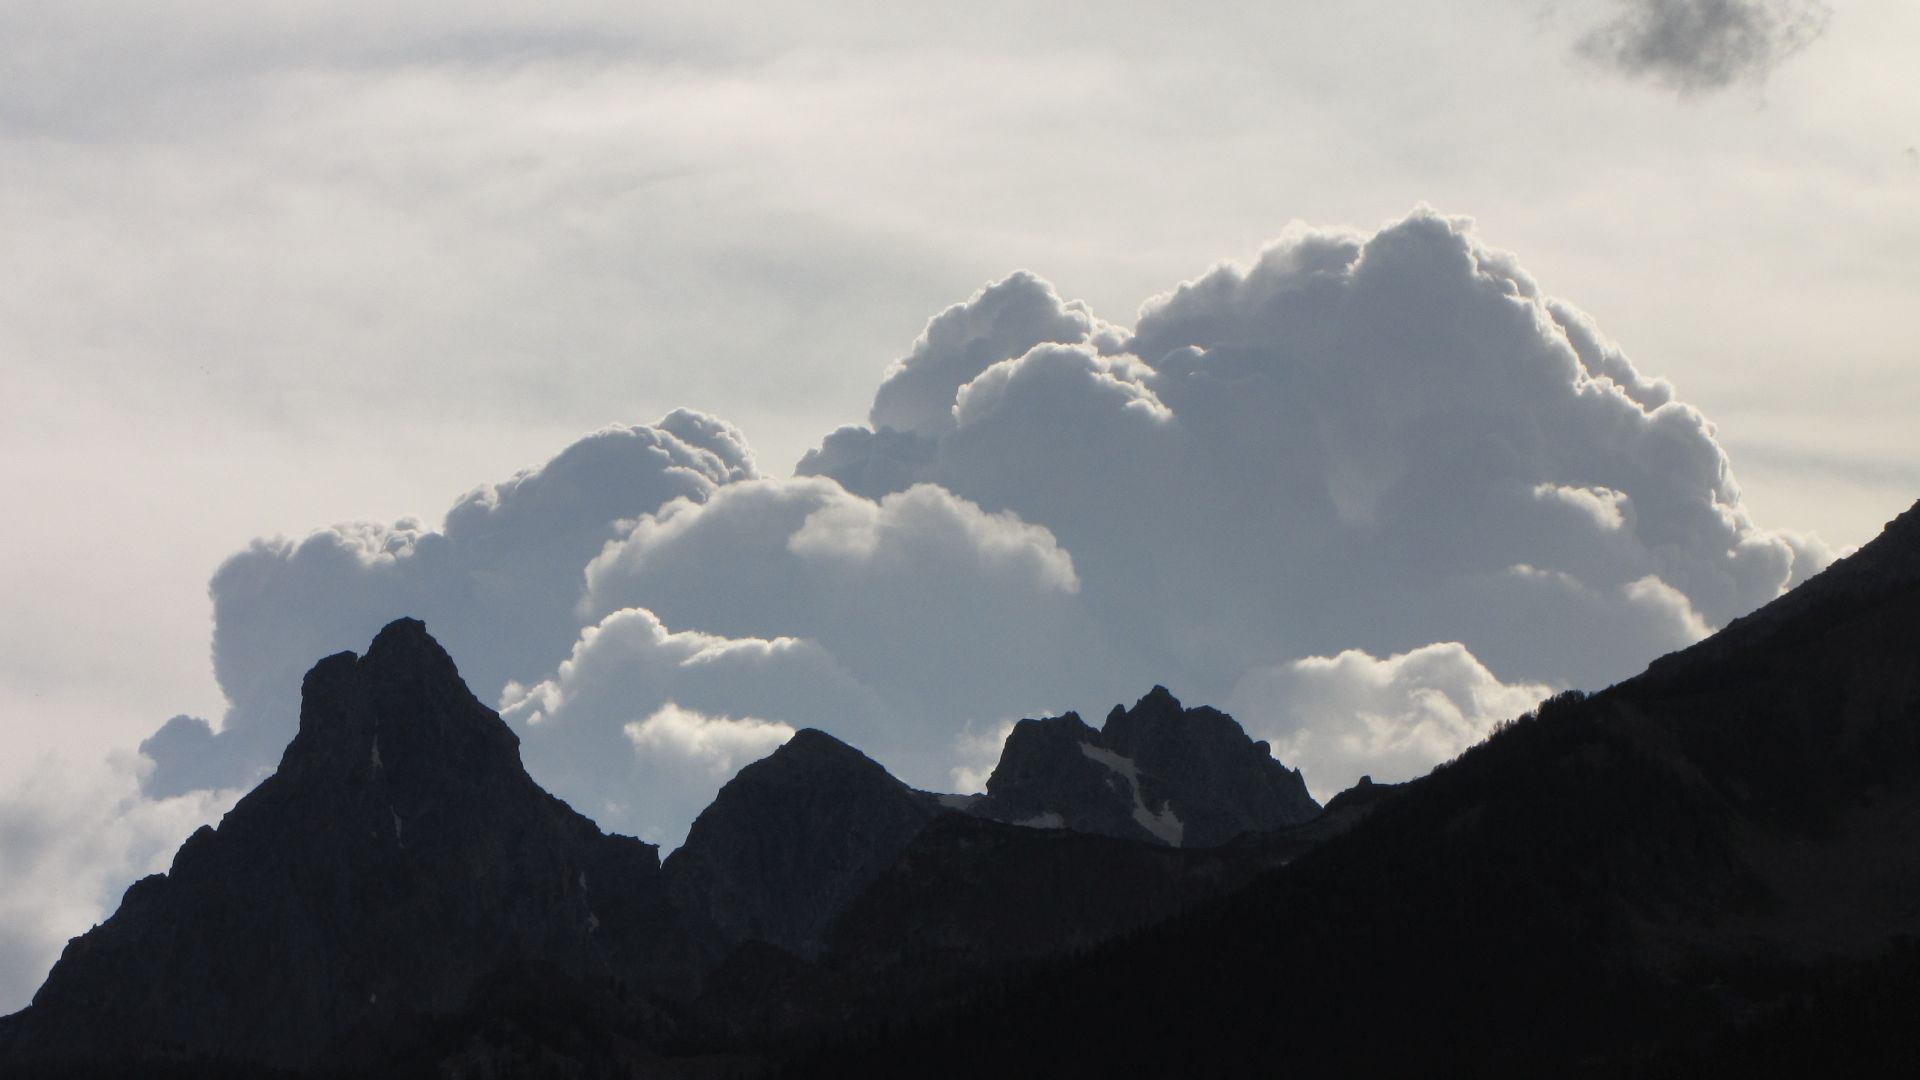 Grand Teton Nat Pk, WY, USA - Biblically proportioned storm building in front of my very eyes...eek!  Pedal faster!